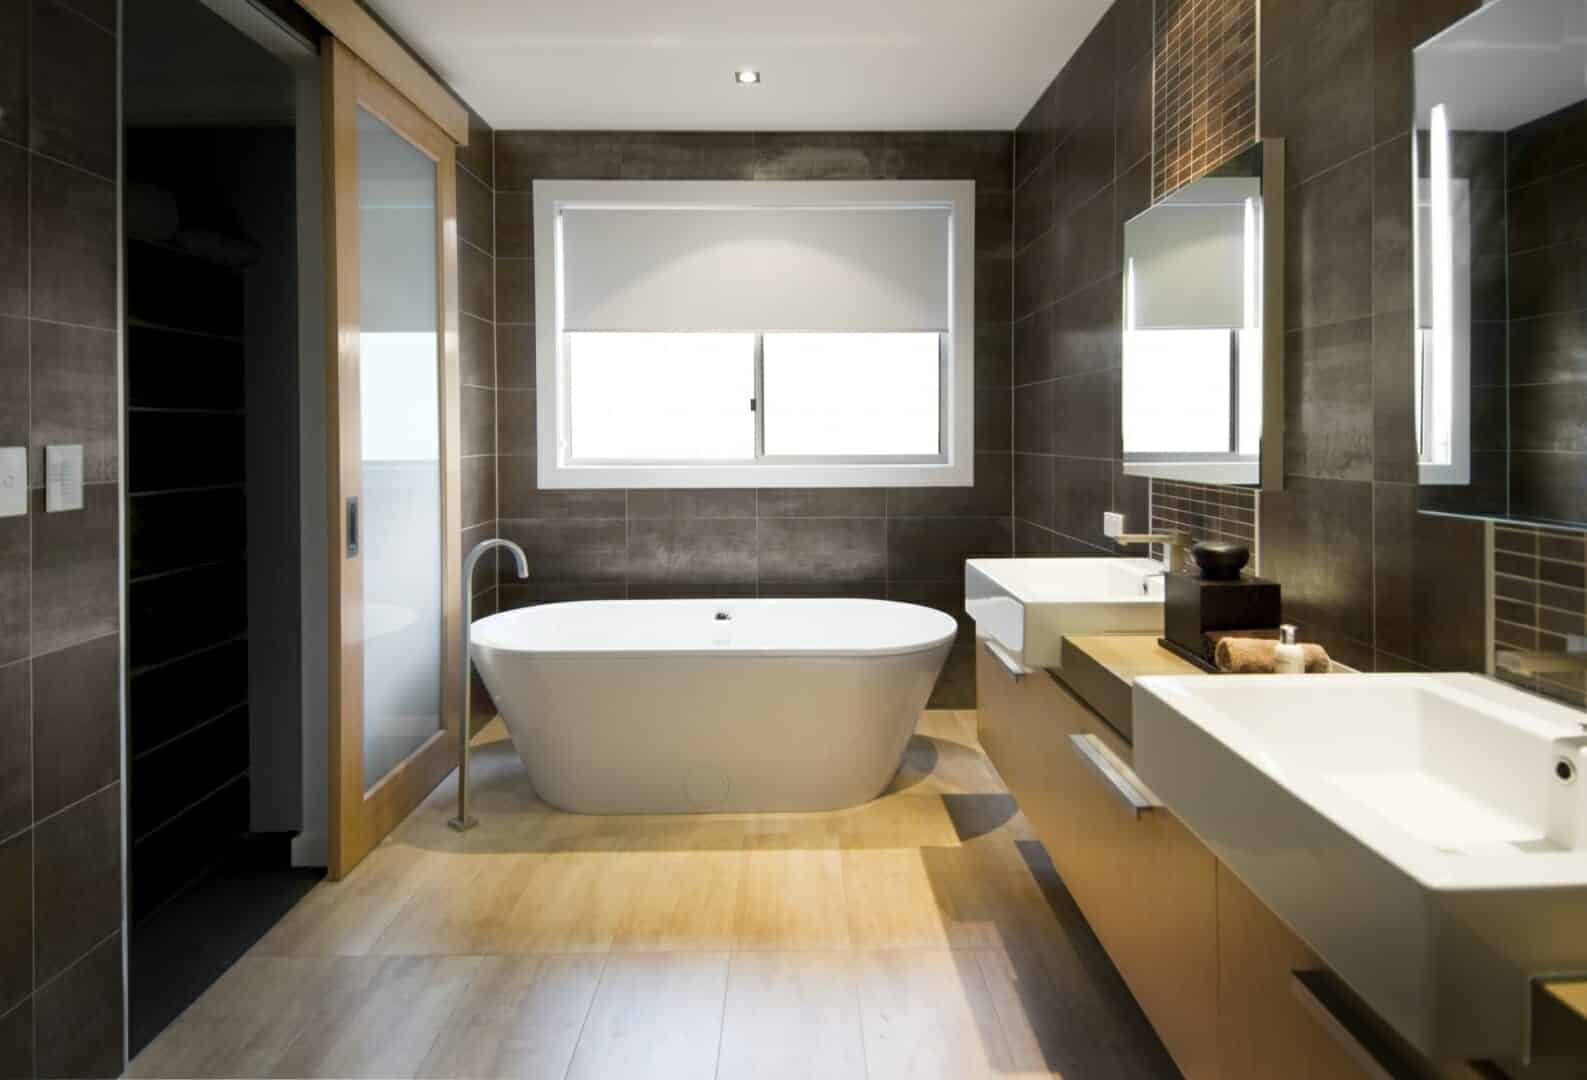 What Are the Best Materials for a Dark Green Bathroom?